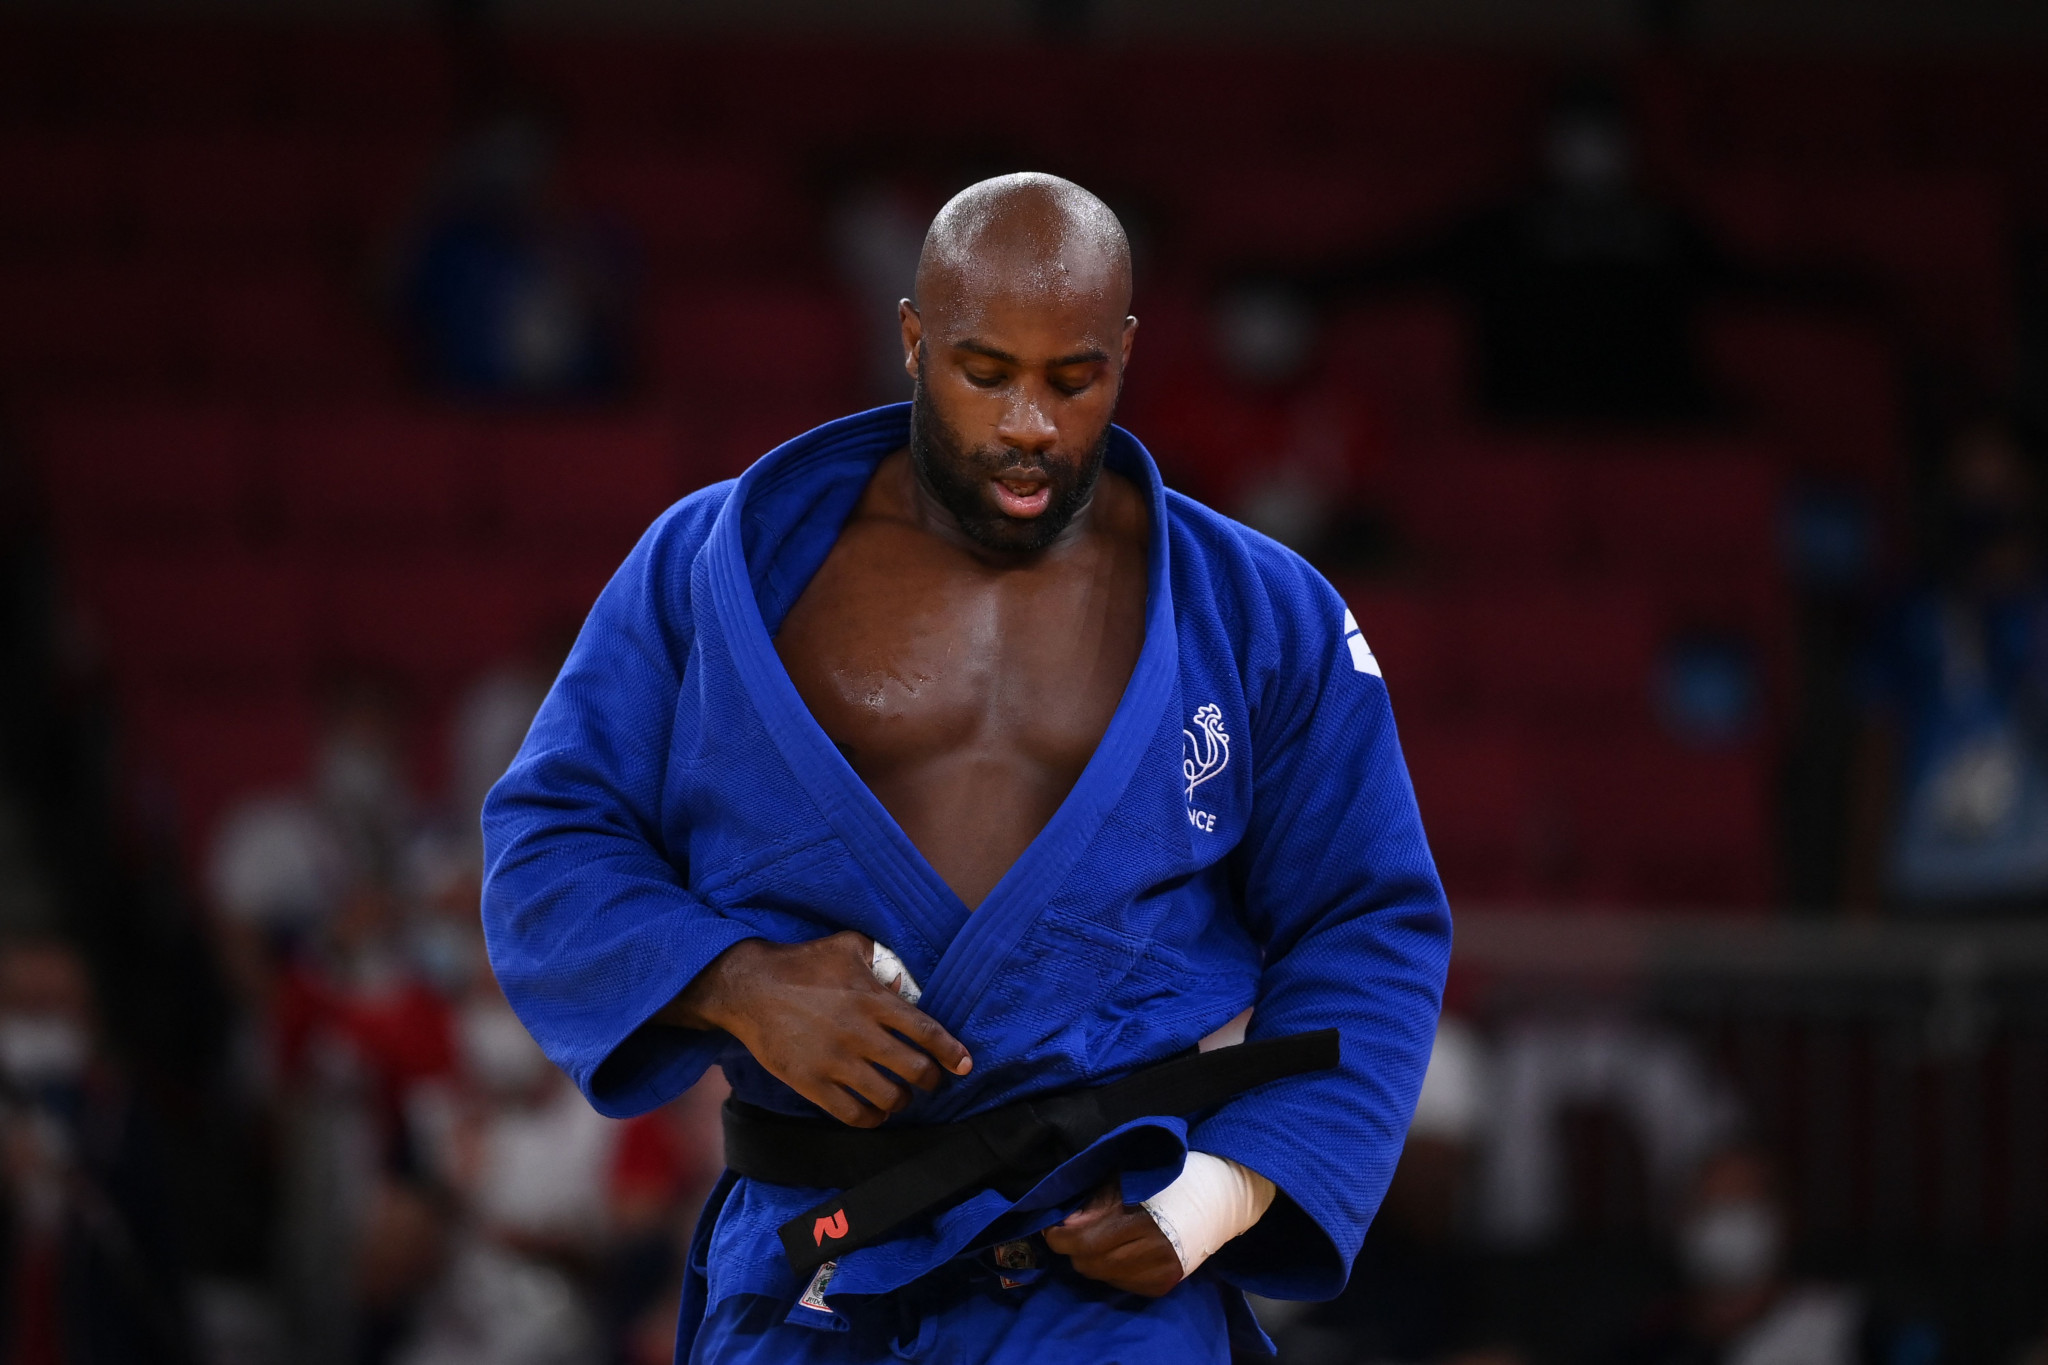 Riner back on the tatami after injury break with sights set on Paris 2024